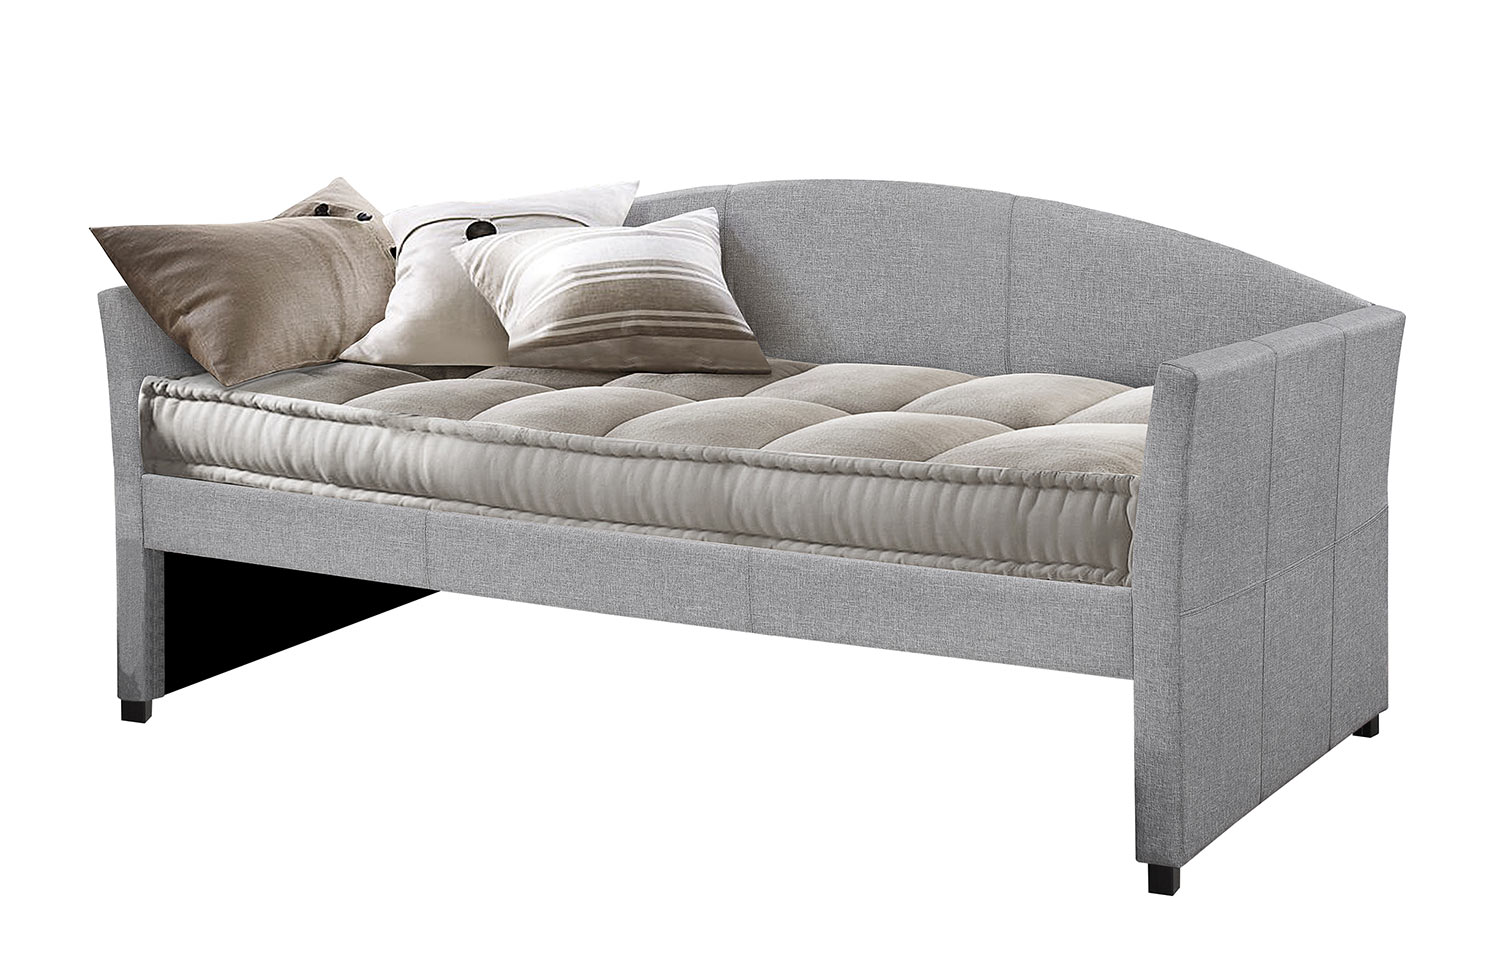 Hillsdale Westchester Daybed - Smoke Gray